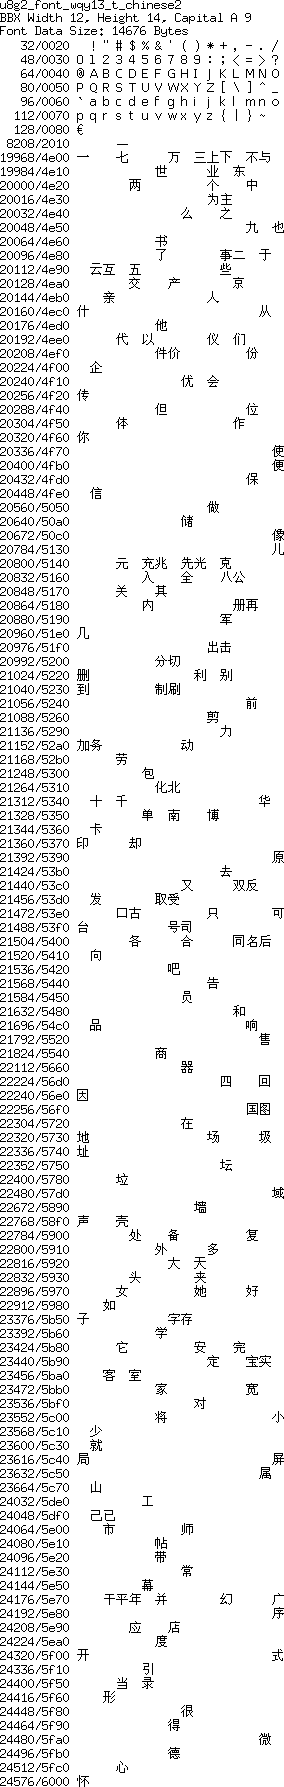 fntpic/u8g2_font_wqy13_t_chinese2.png